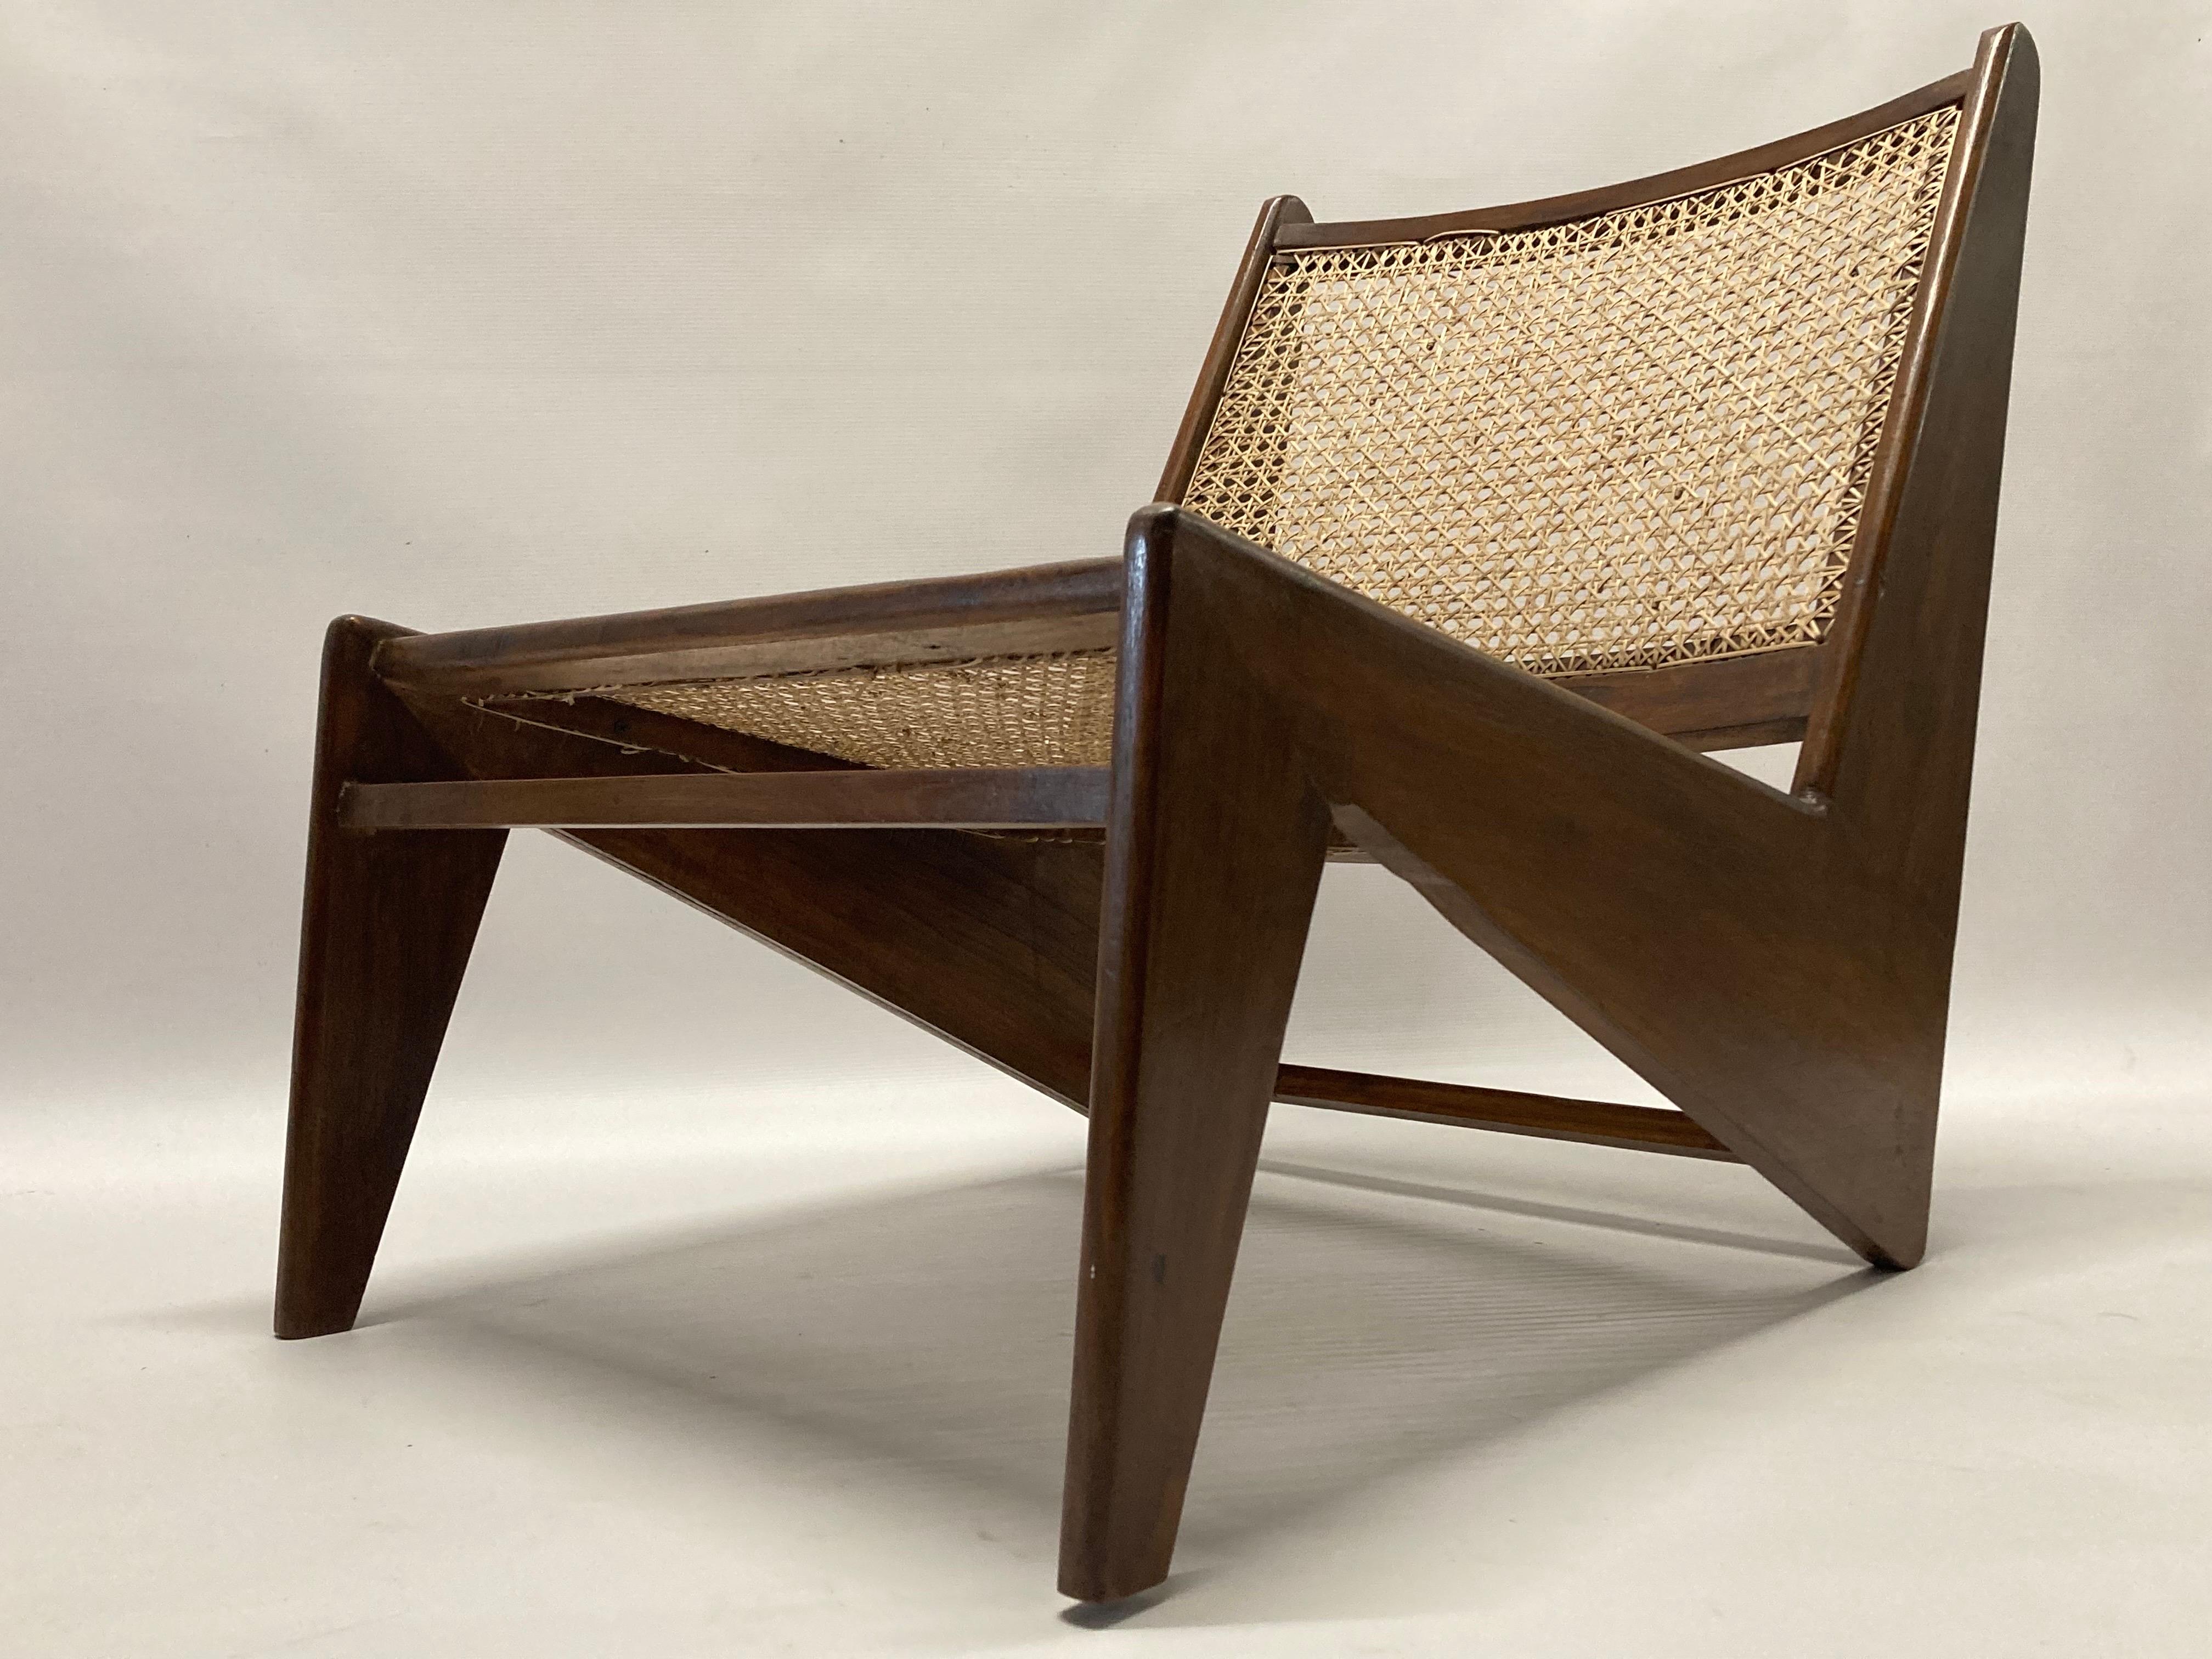 1950s Pierre Jeanneret 'Kangourou' Chandigarh Lounge Chair PJ-SI-59-A For Sale 2